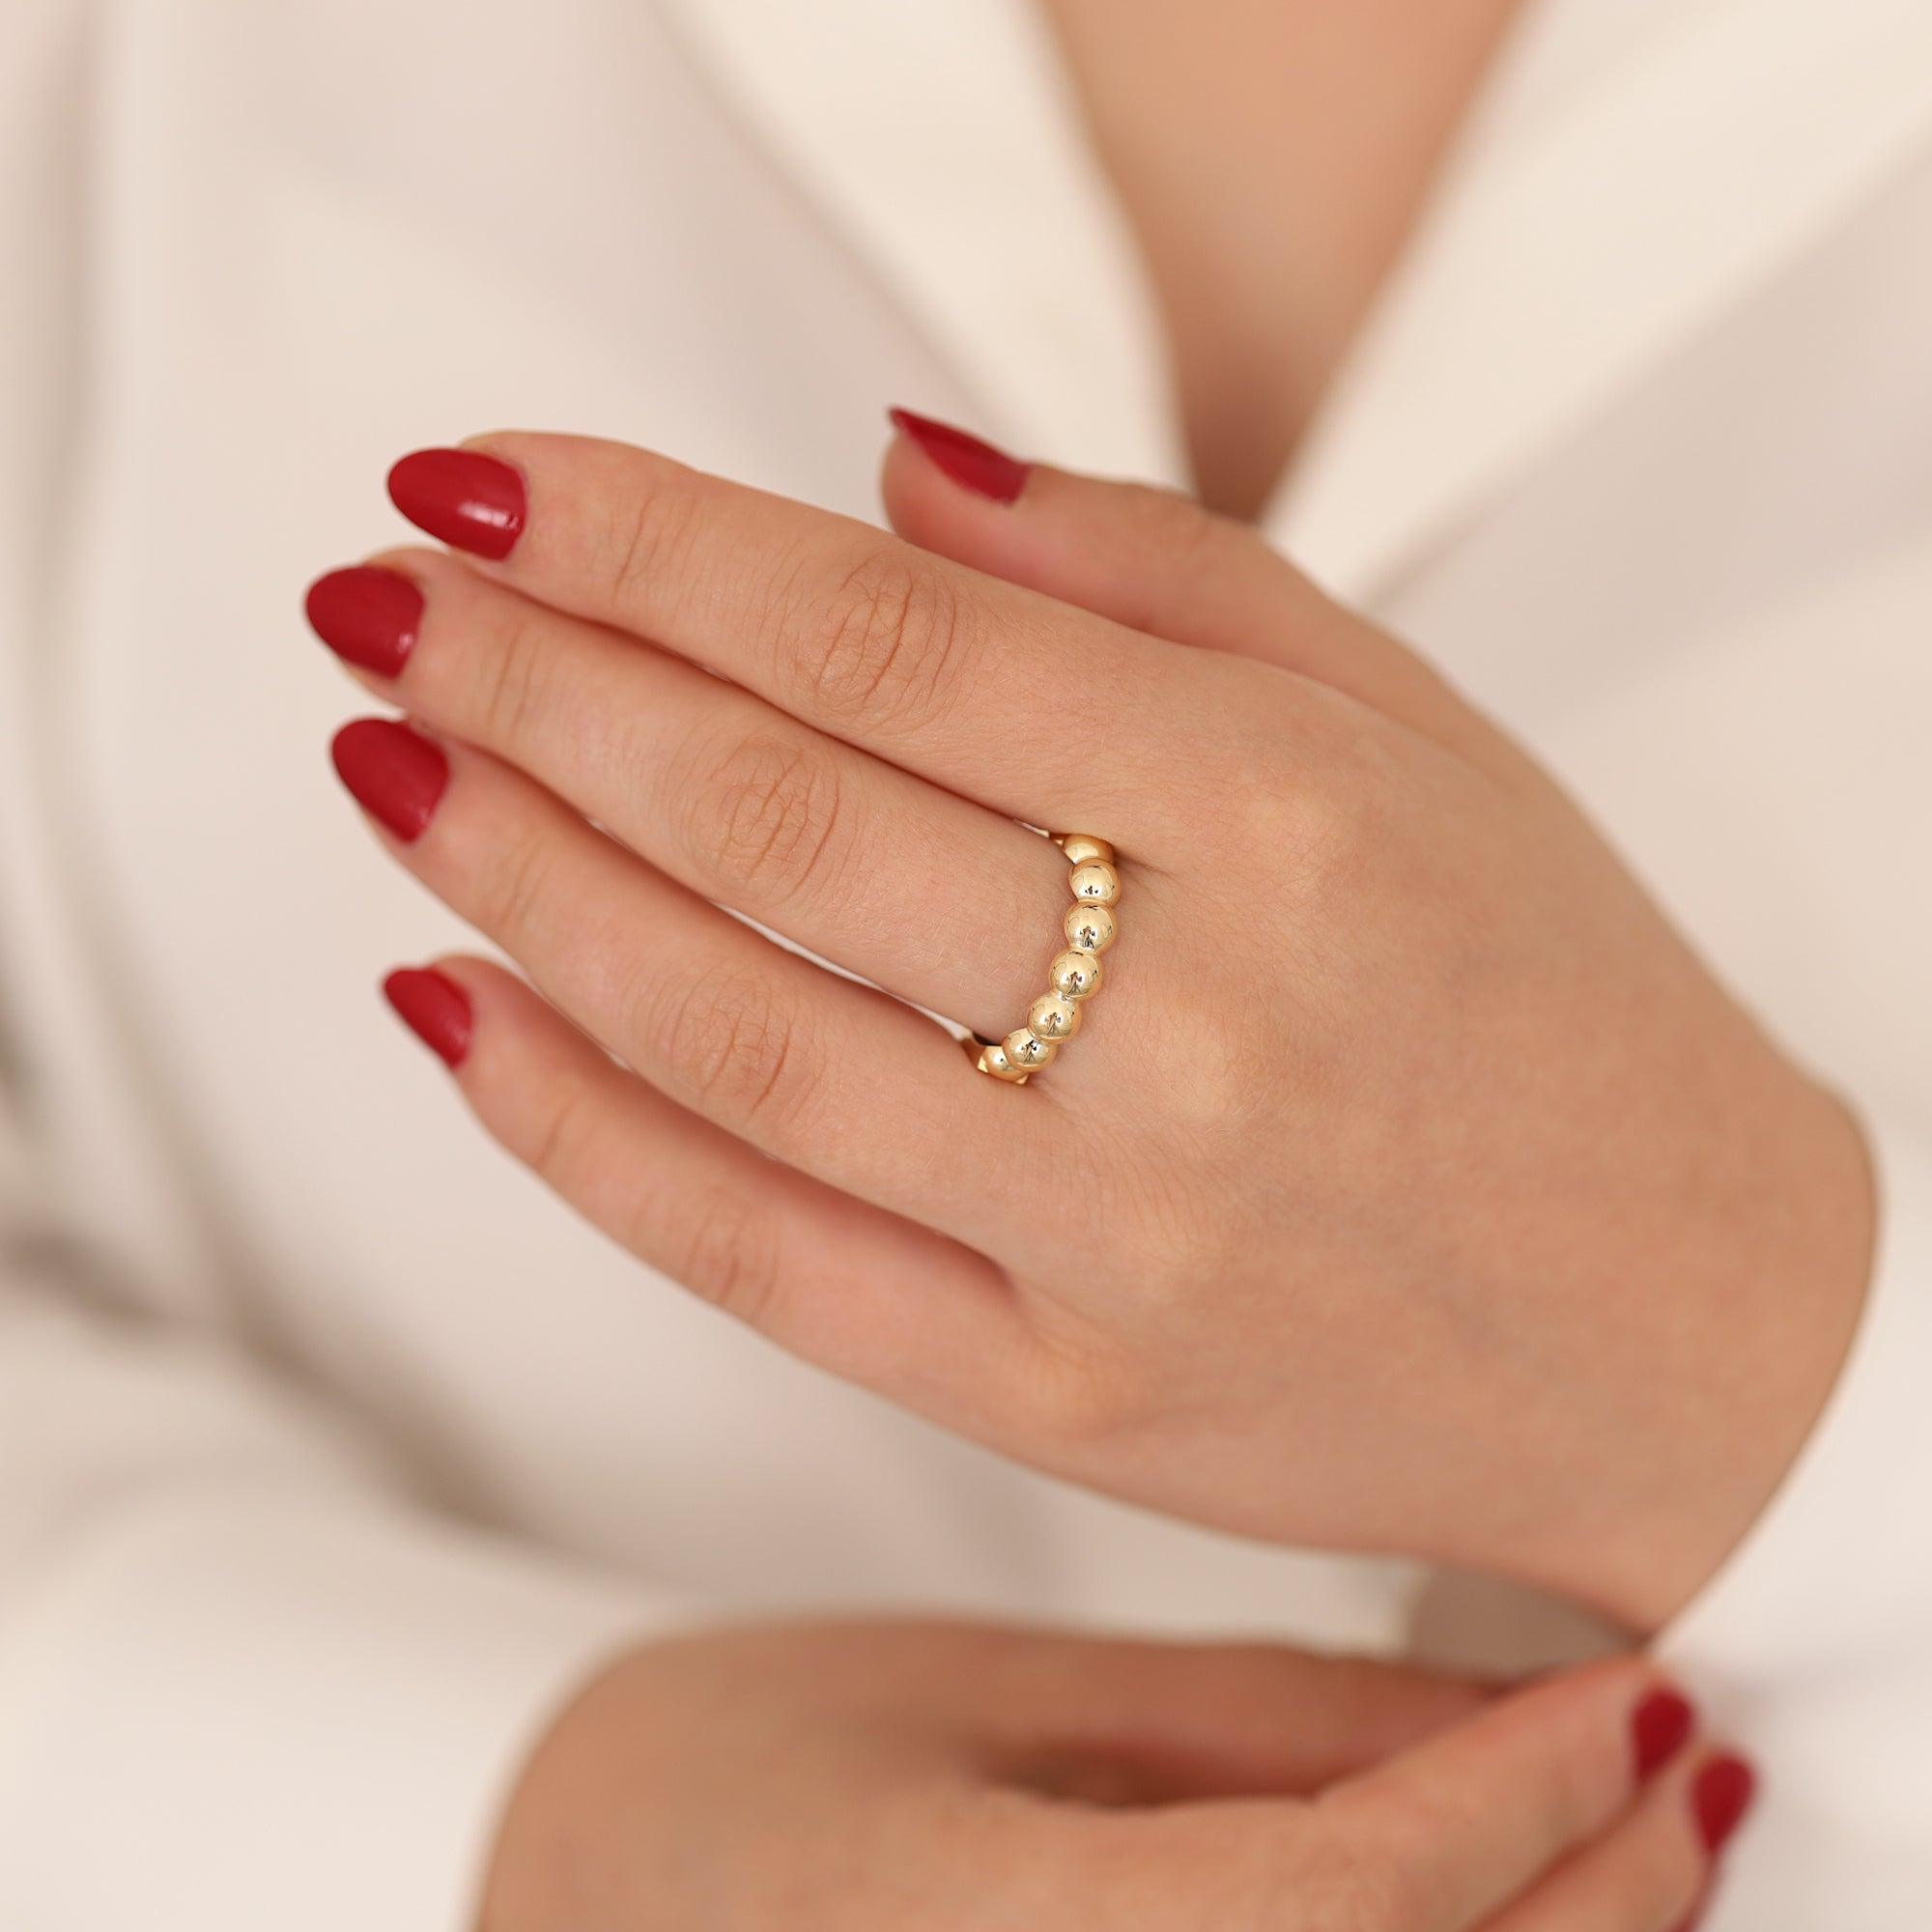 14k Gold 5mm Gold Bubble Ring - DionJewel